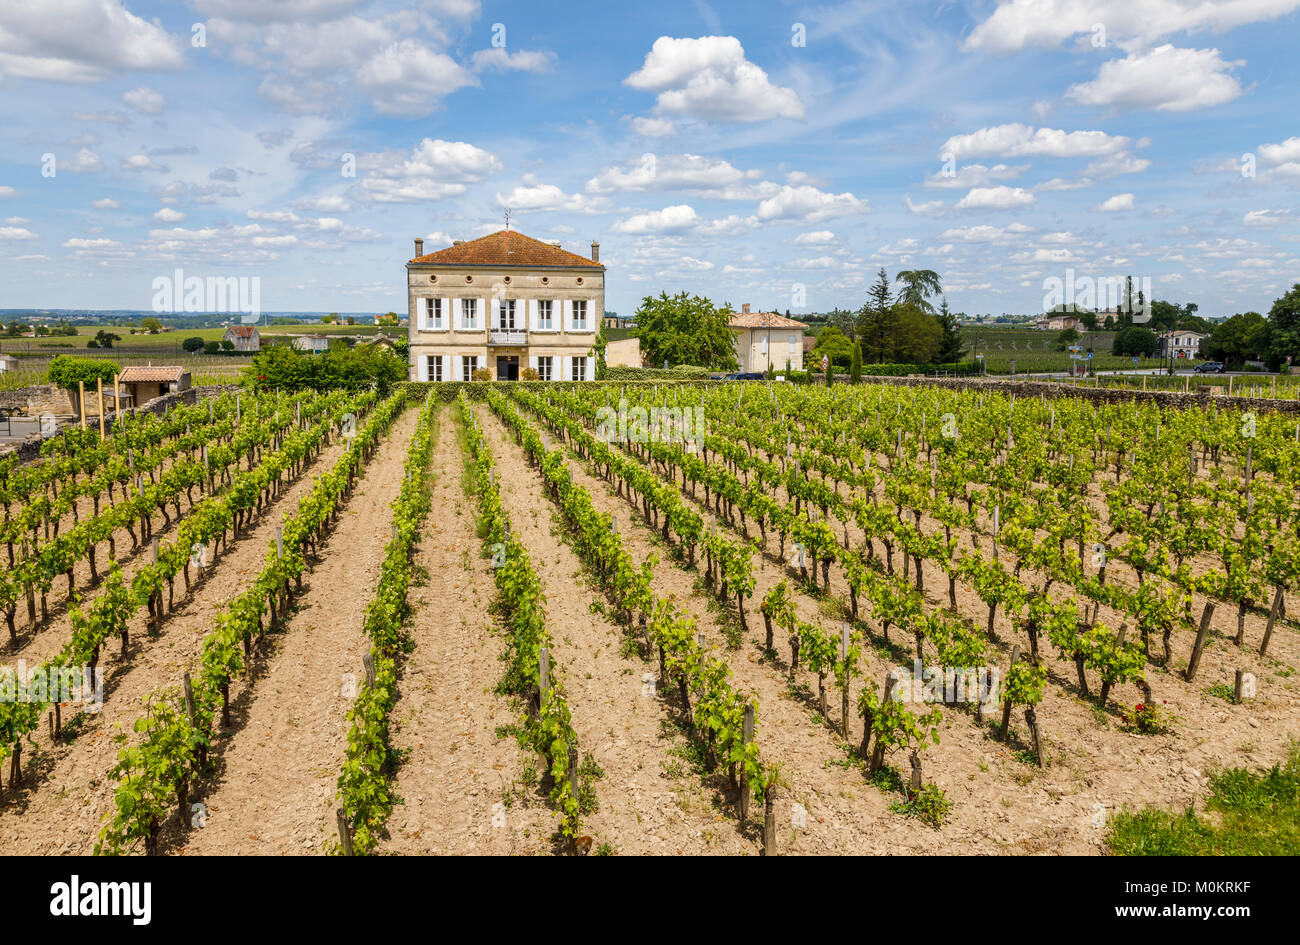 View of large house and rows of vines growing in a vineyard, Saint-Emilion, a commune in the Gironde department in Nouvelle-Aquitaine southwest France Stock Photo